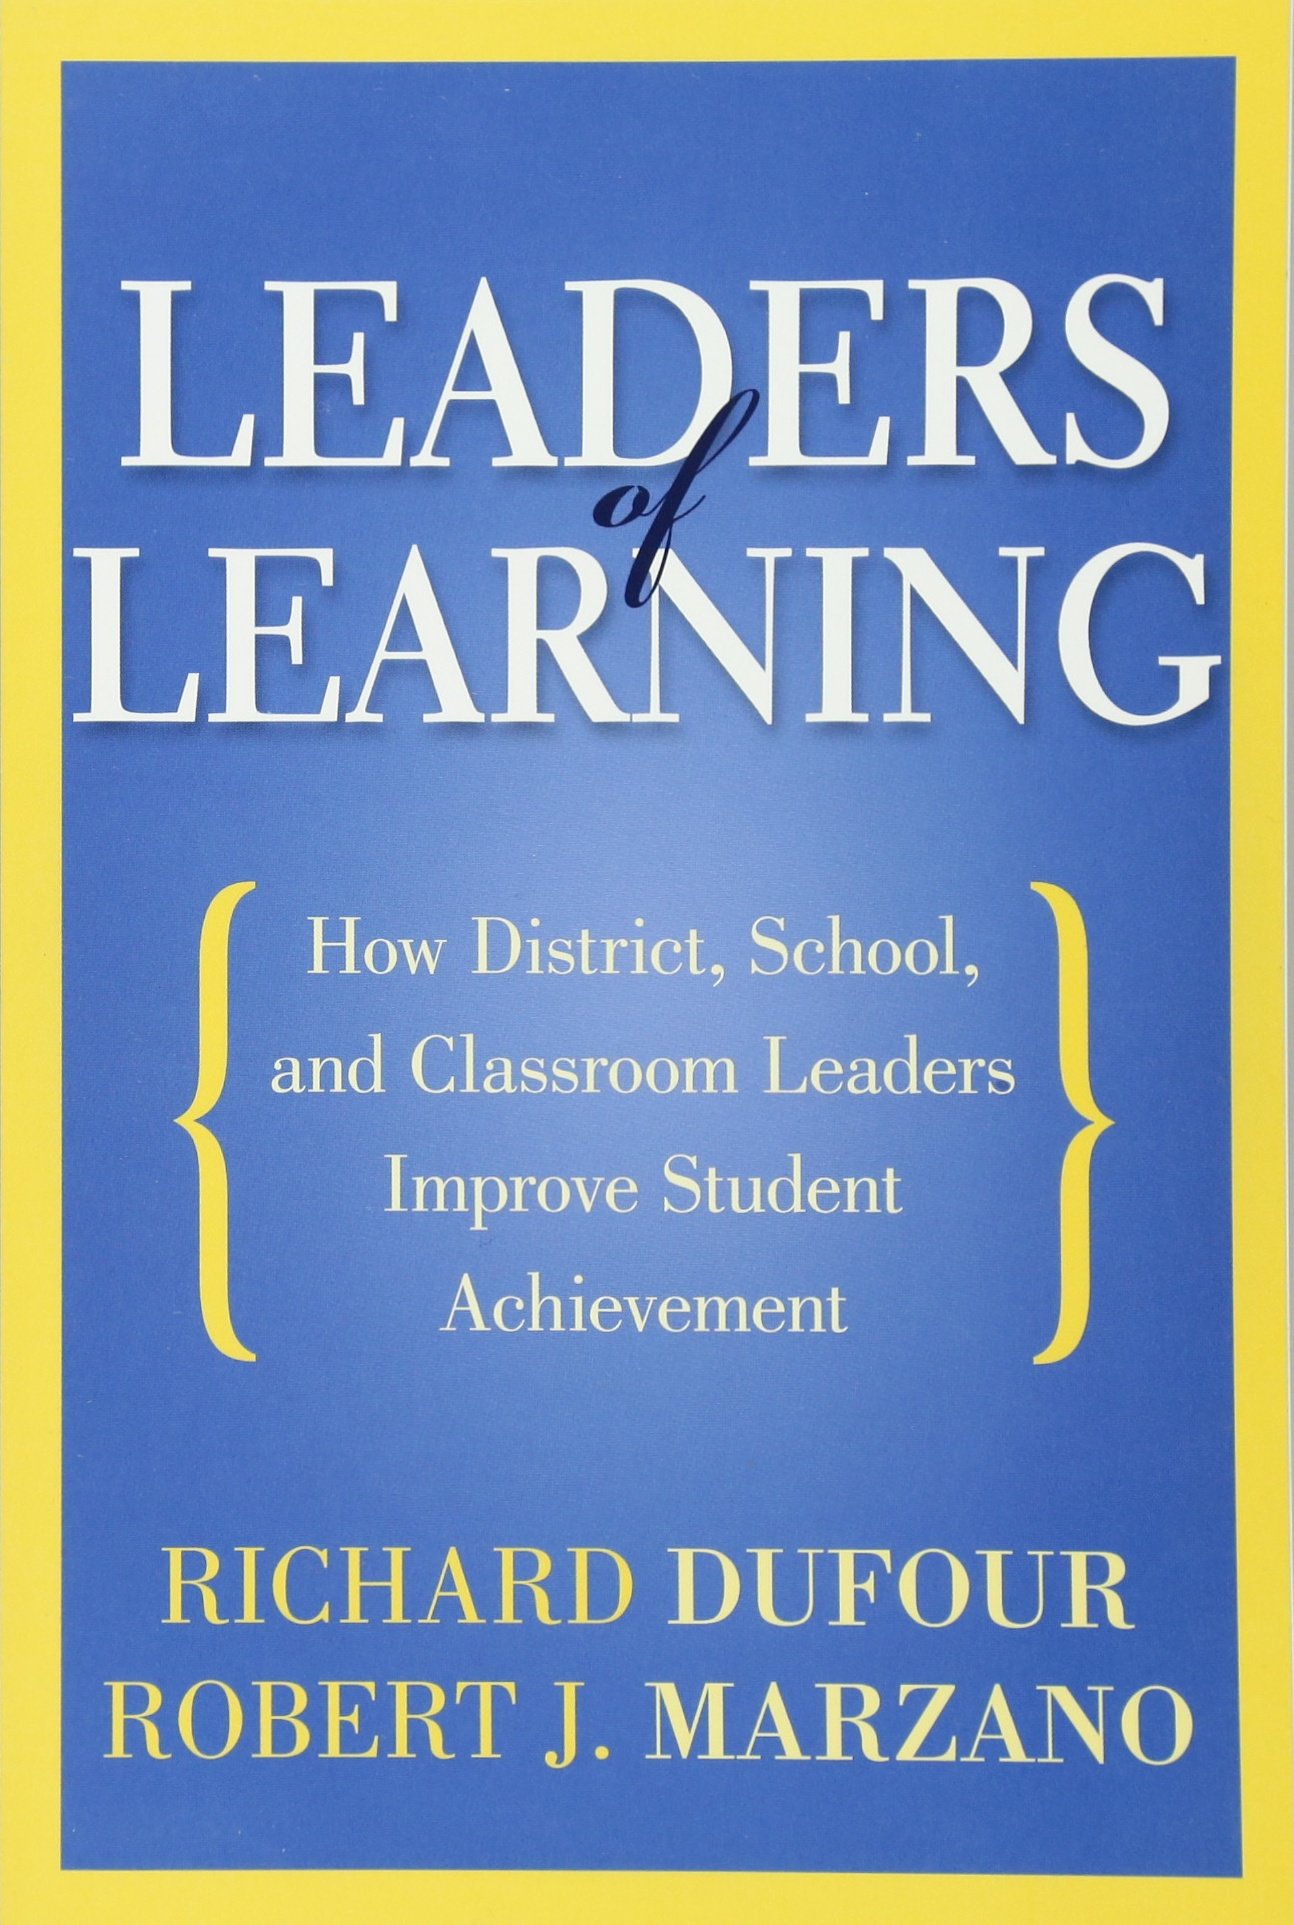 LEADERS OF LEARNING: HOW DISTRICT, SCHOOL, AND CLASSROOM LEADERS IMPROVE STUDENT ACHIEVEMENT